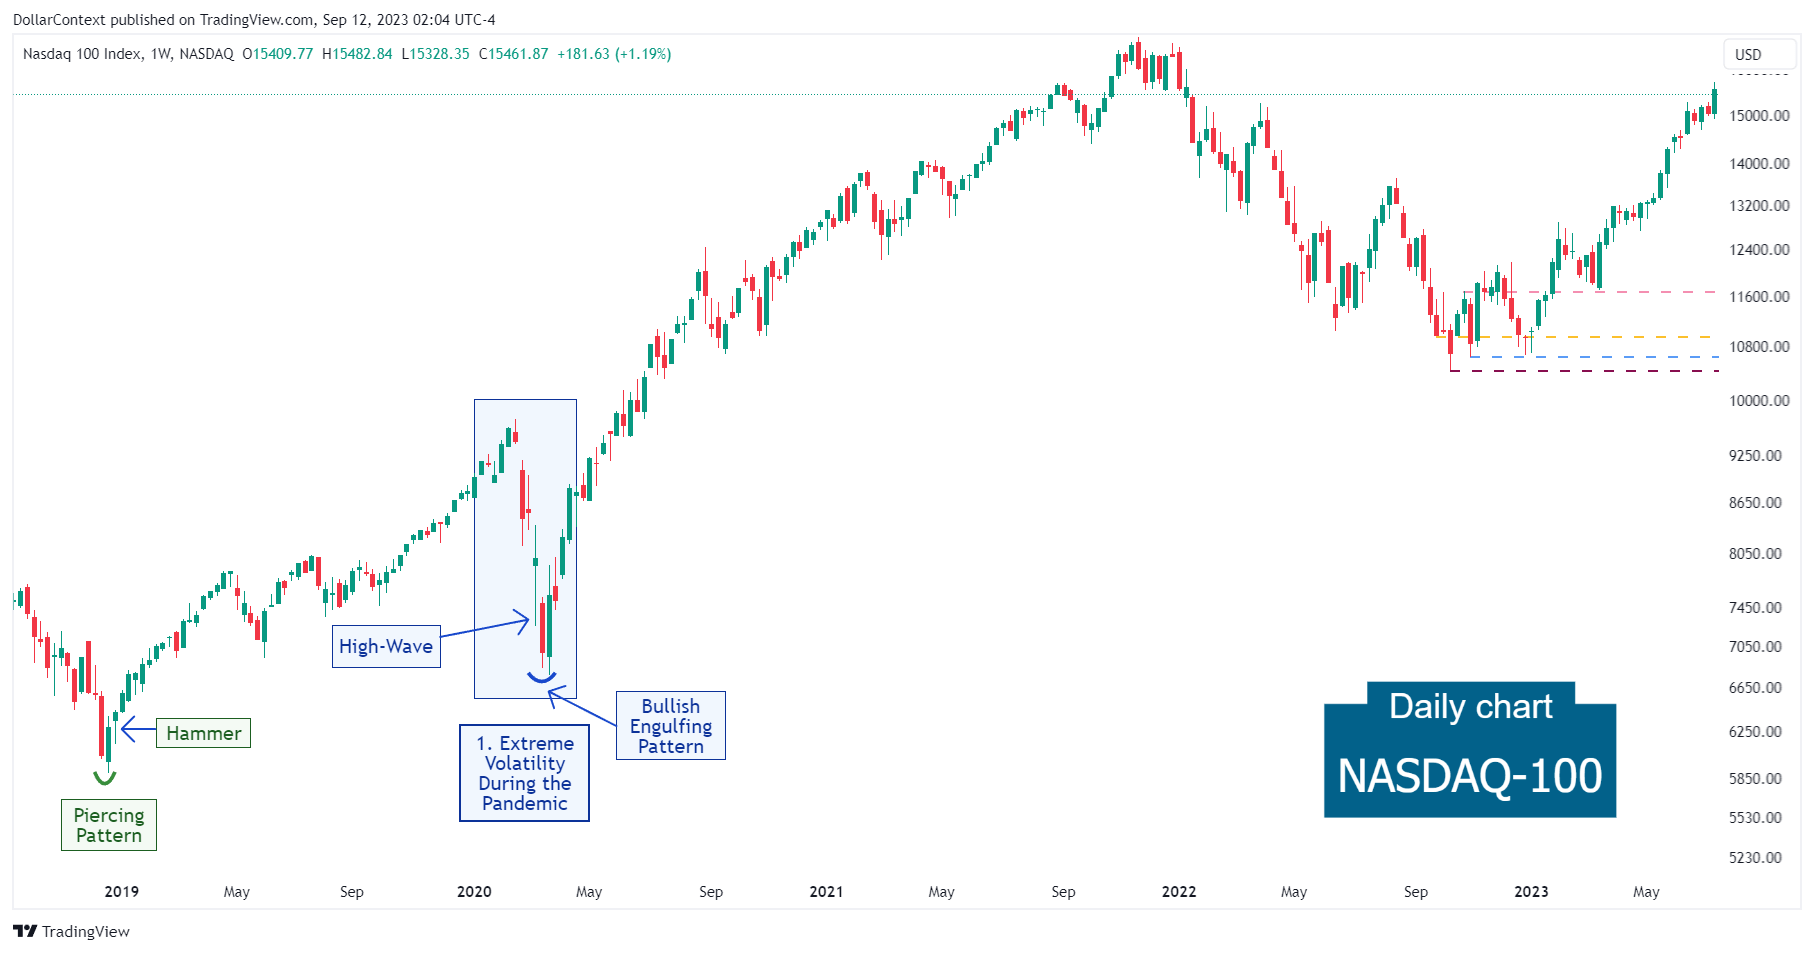 Nasdaq-100: Extreme Levels of Volatility in Early 2020 (Weekly Chart)